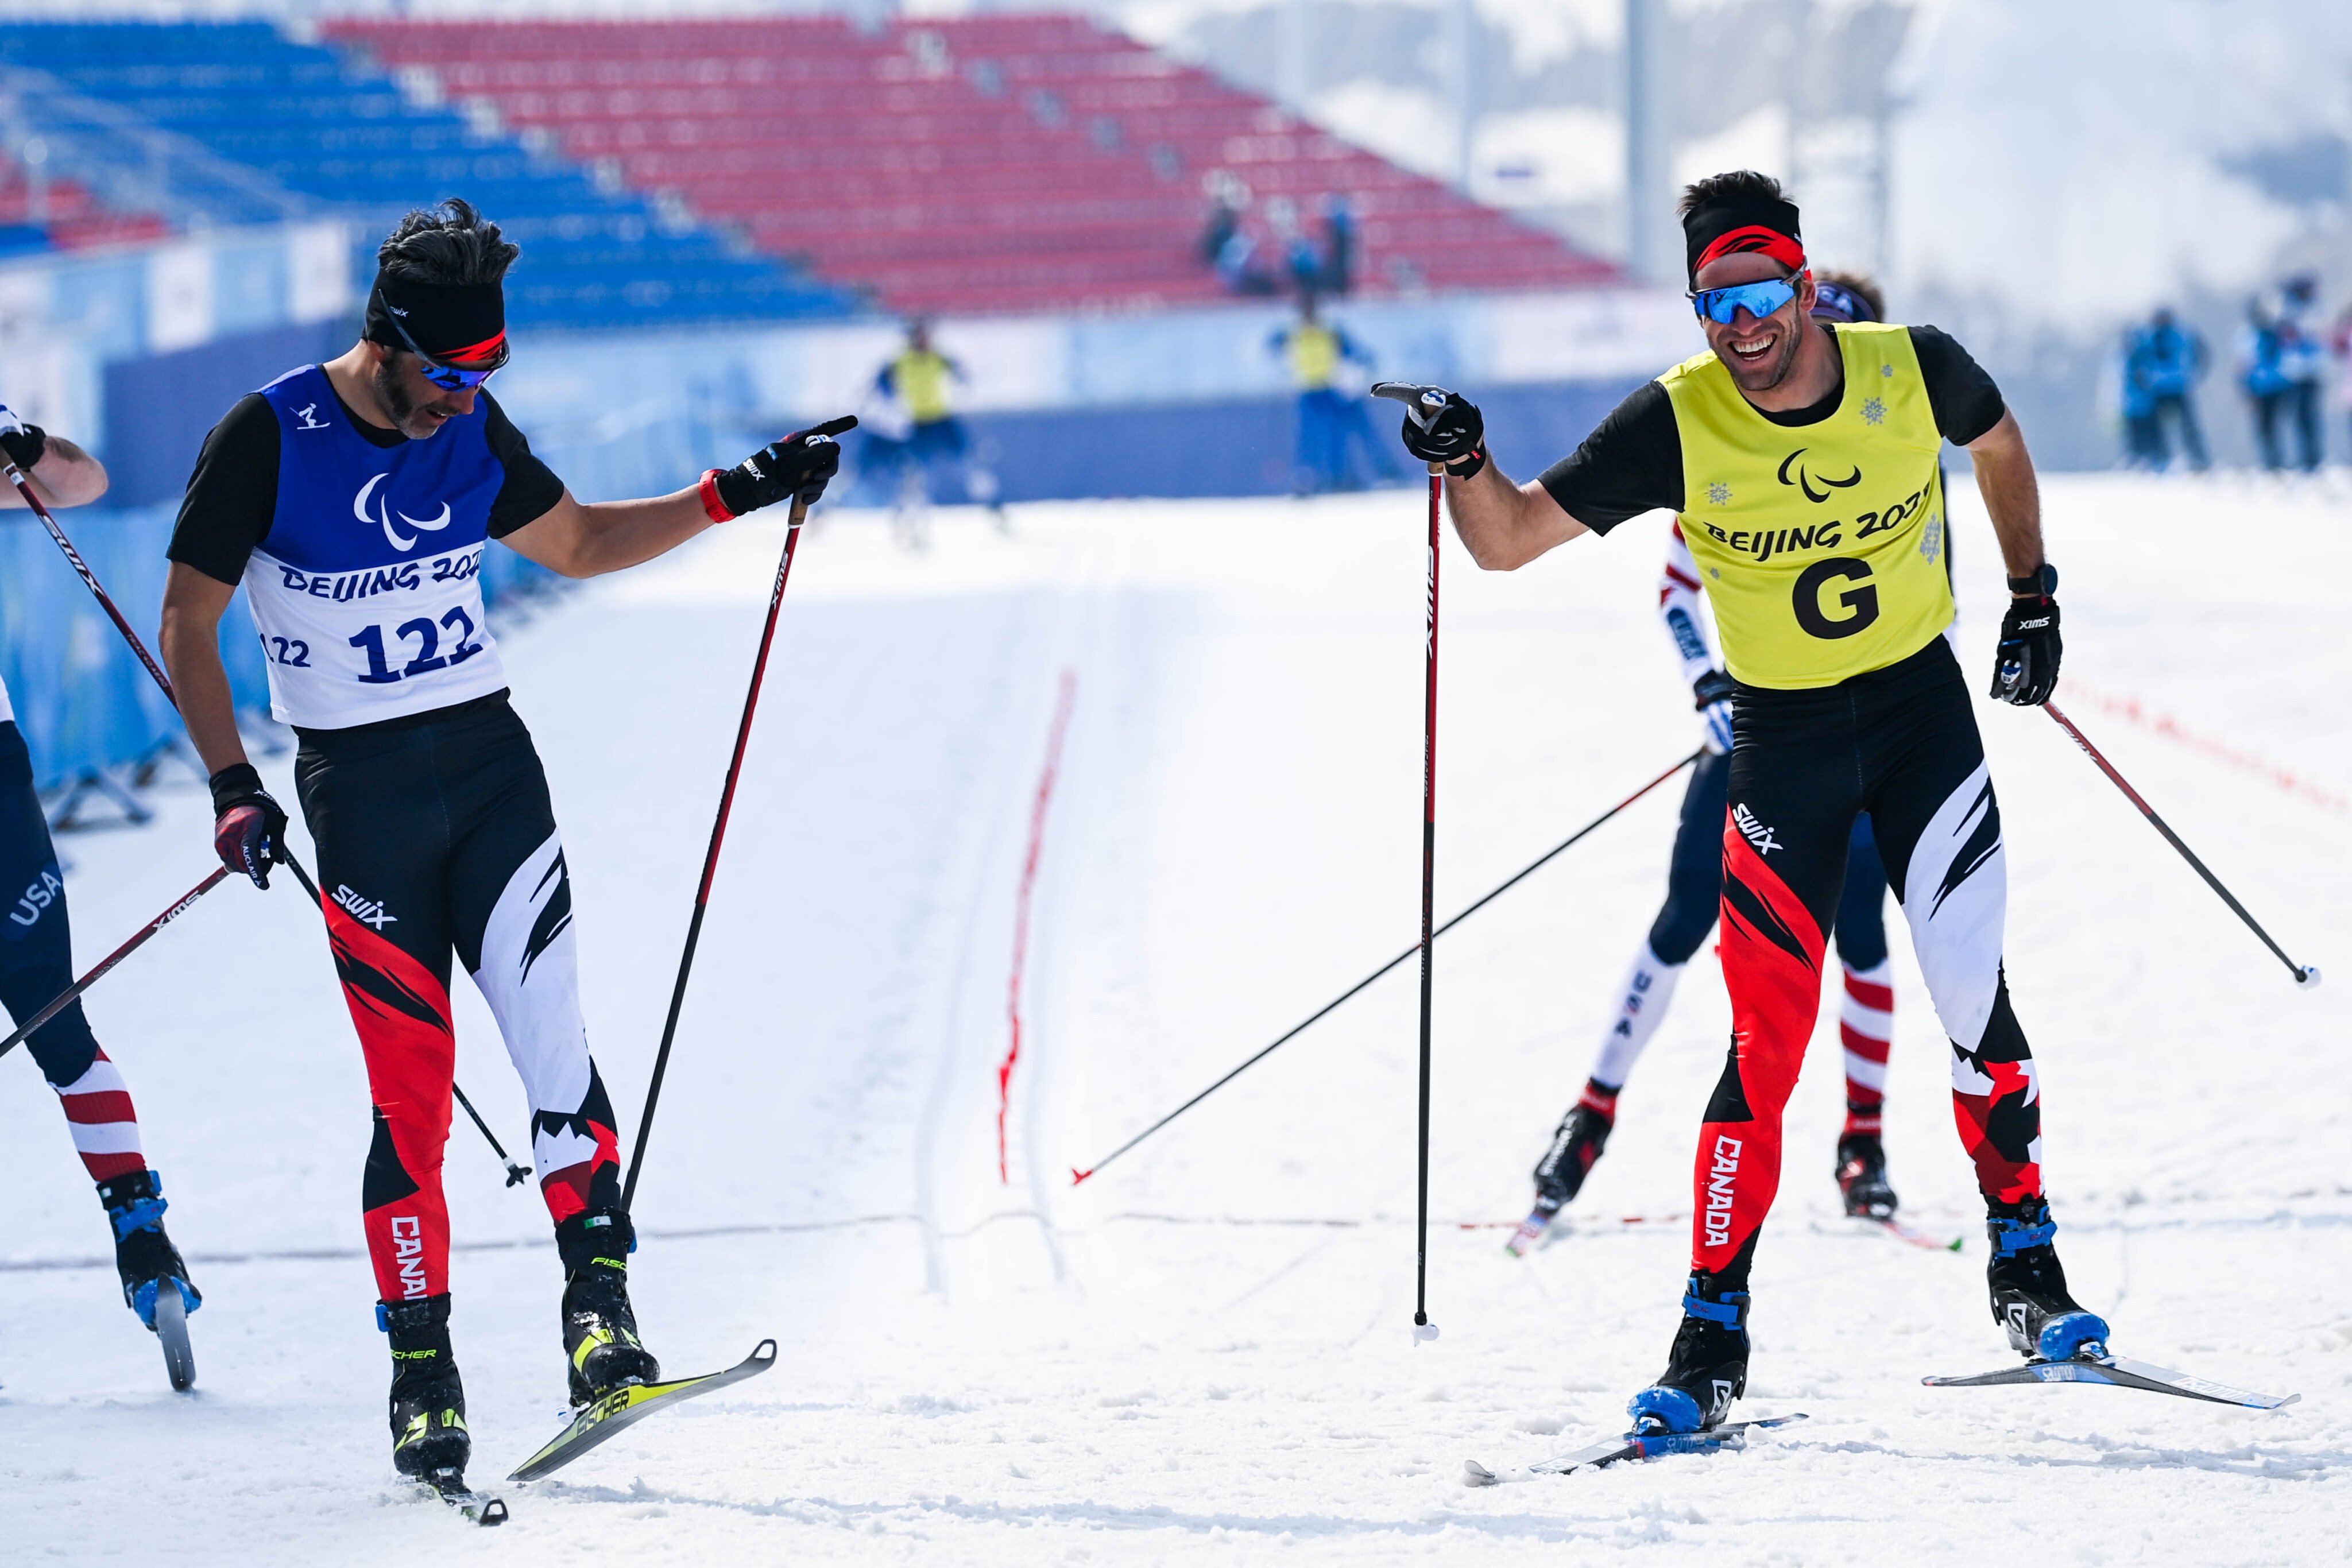 Gold medallist Brian McKeever (let) of Canada and his guide Russell Kennedy celebrate after the Para Cross-Country Skiing Men’s Sprint Sitting Free Technique Vision Impaired Final. Photo: Xinhua